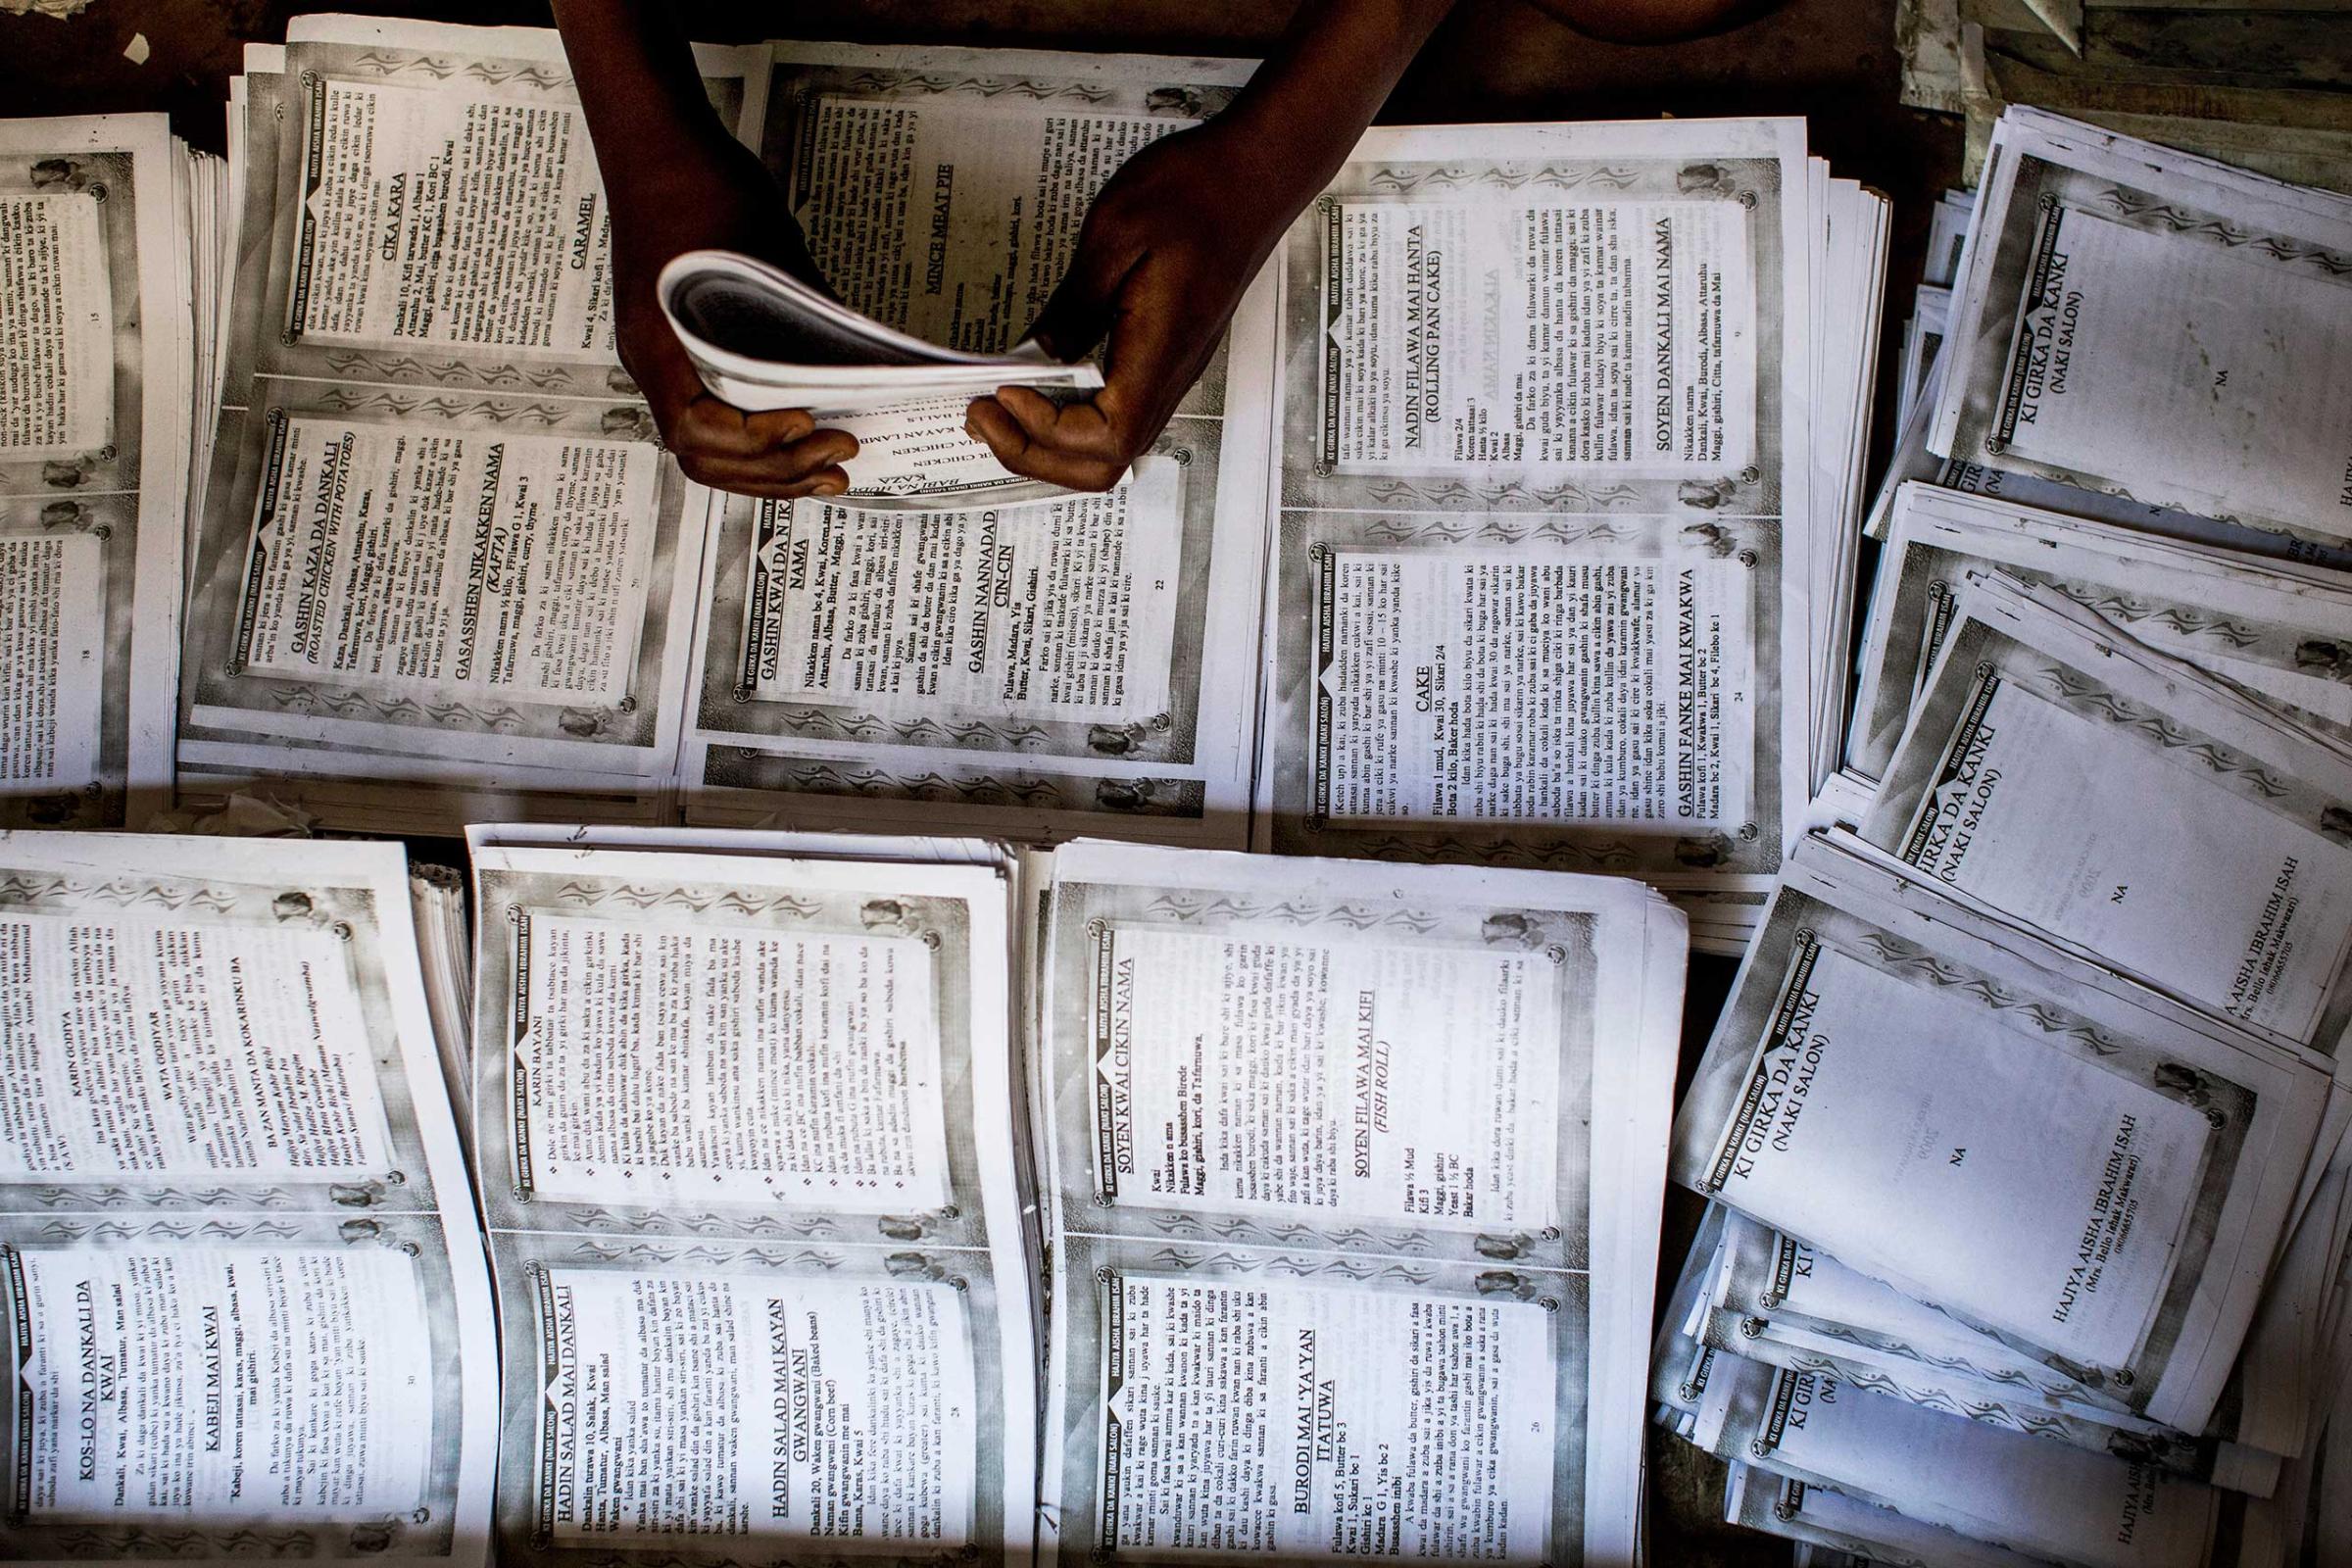 Novels and other books are put together by hand in Kano, Northern Nigeria, April 8, 2013.